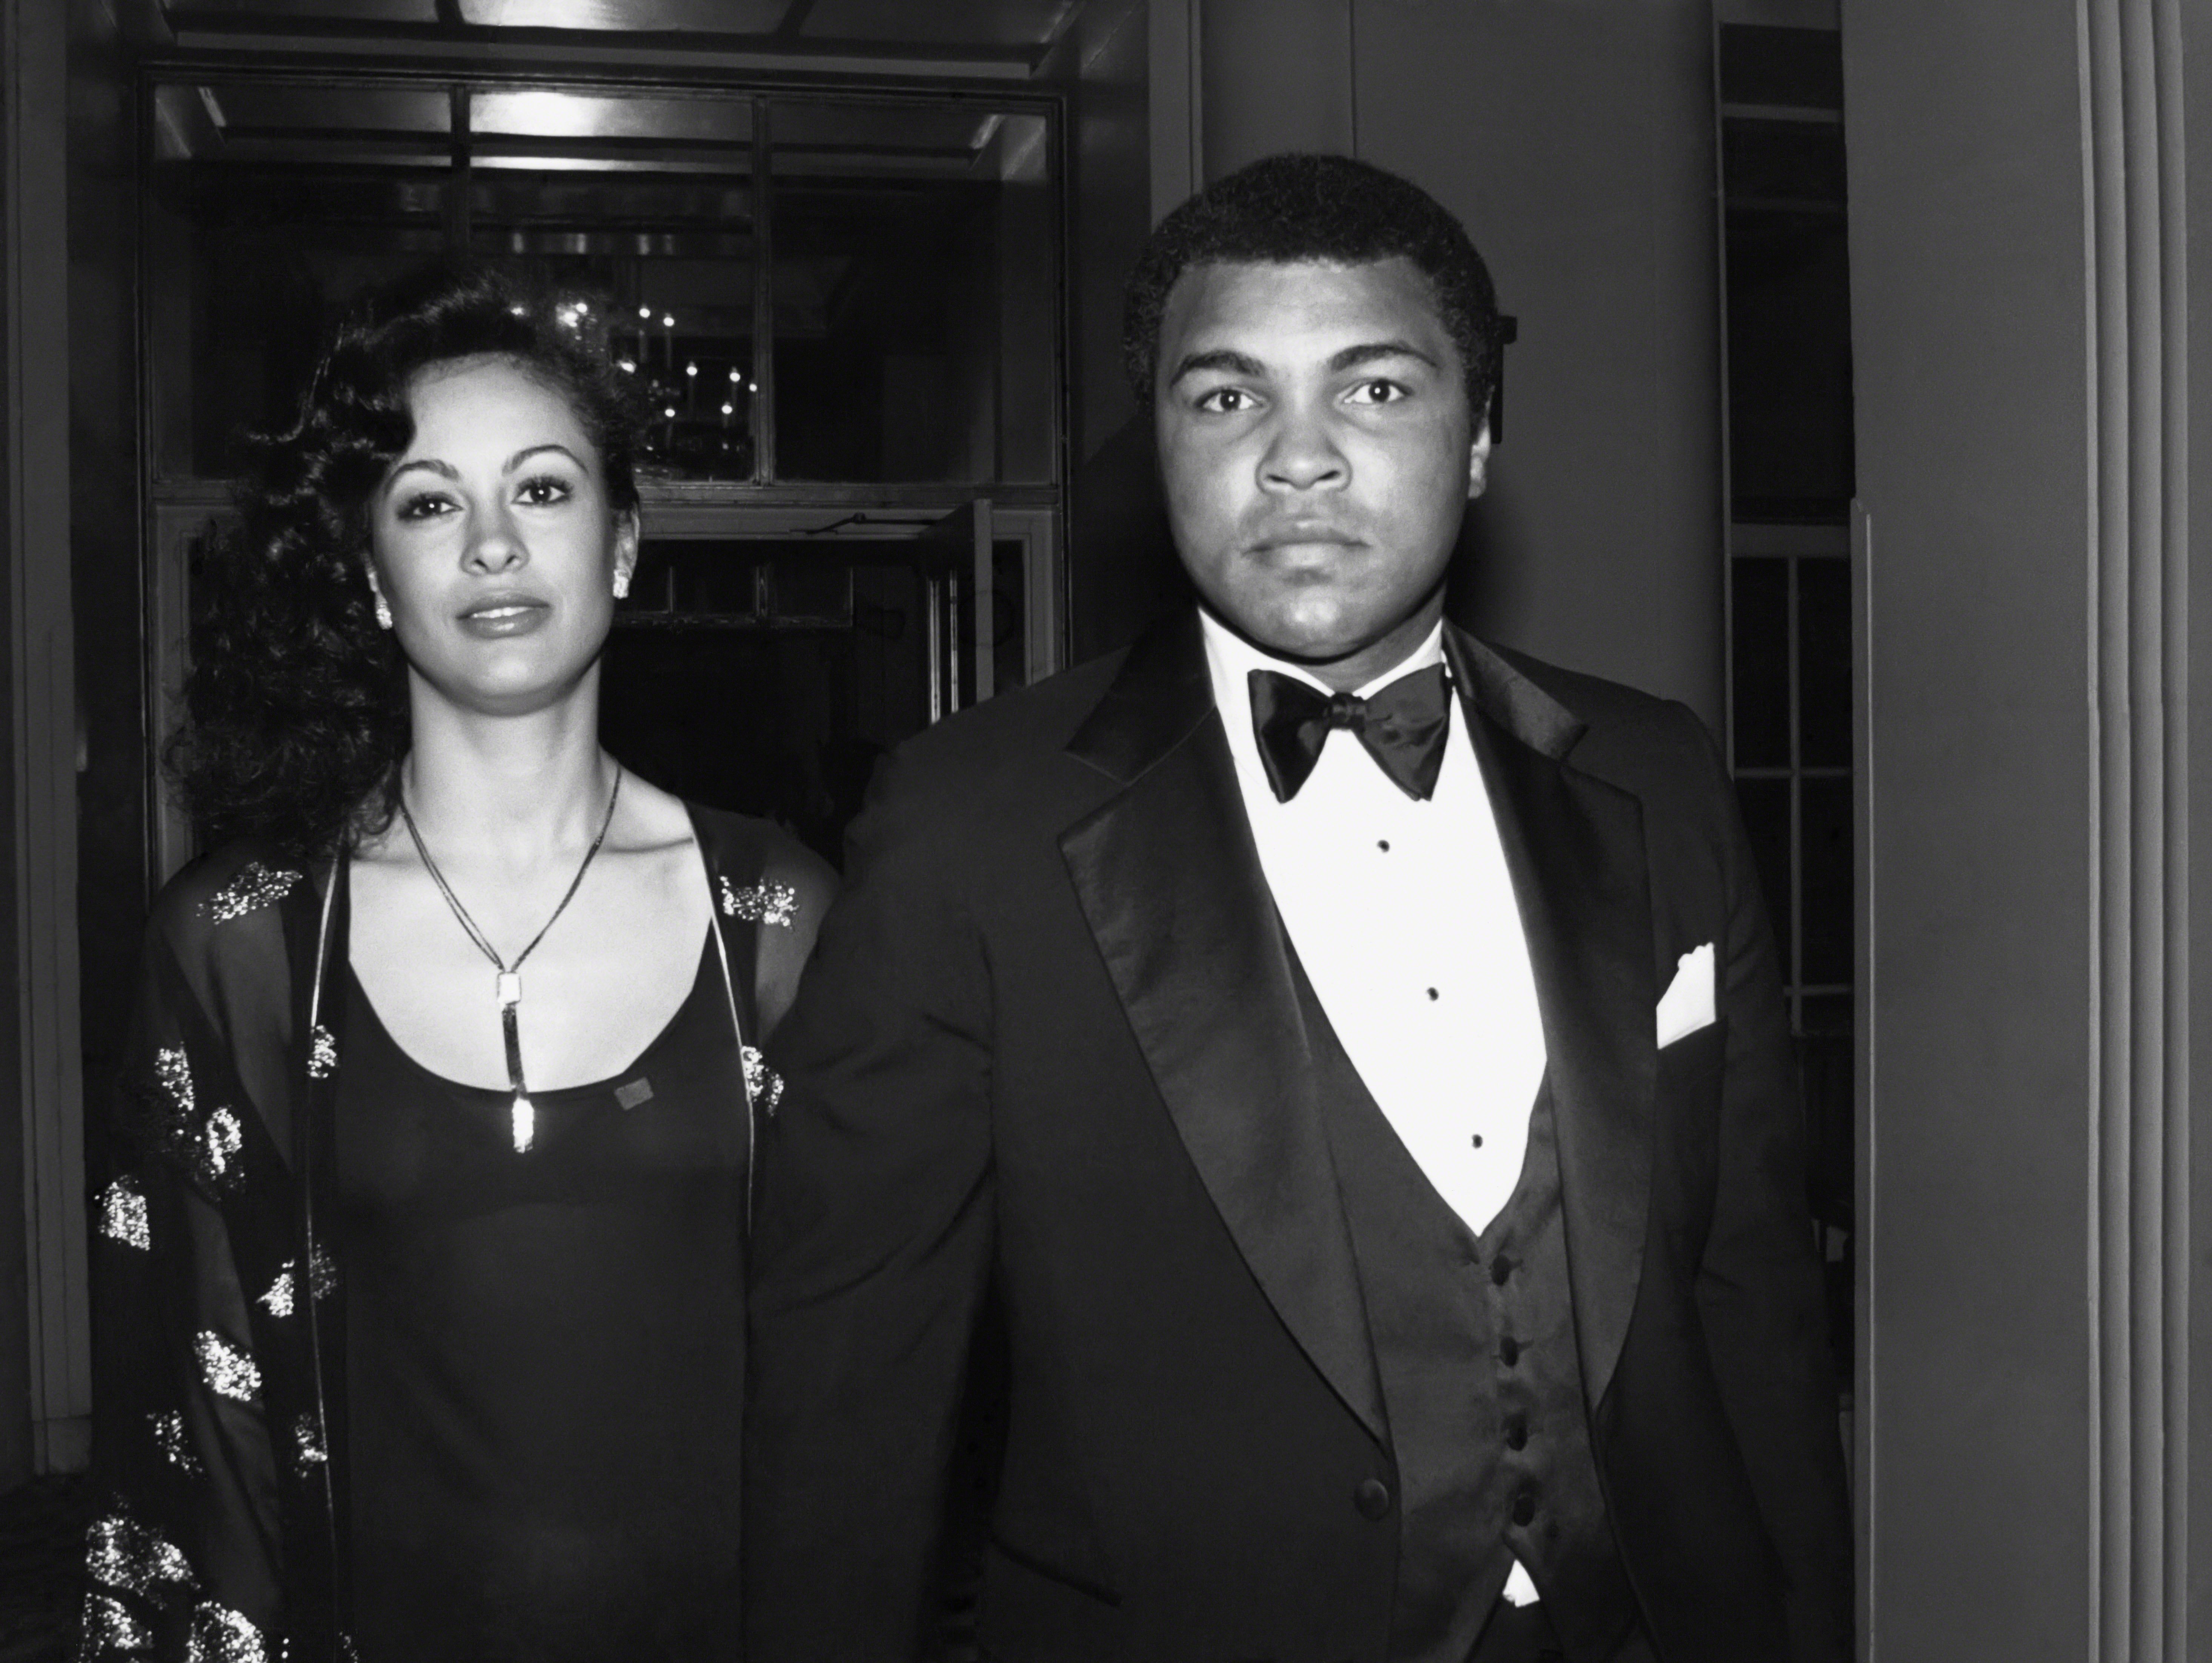 Muhammad Ali and wife Veronica Porché circa 1981 in New York City. | Source: Getty Images